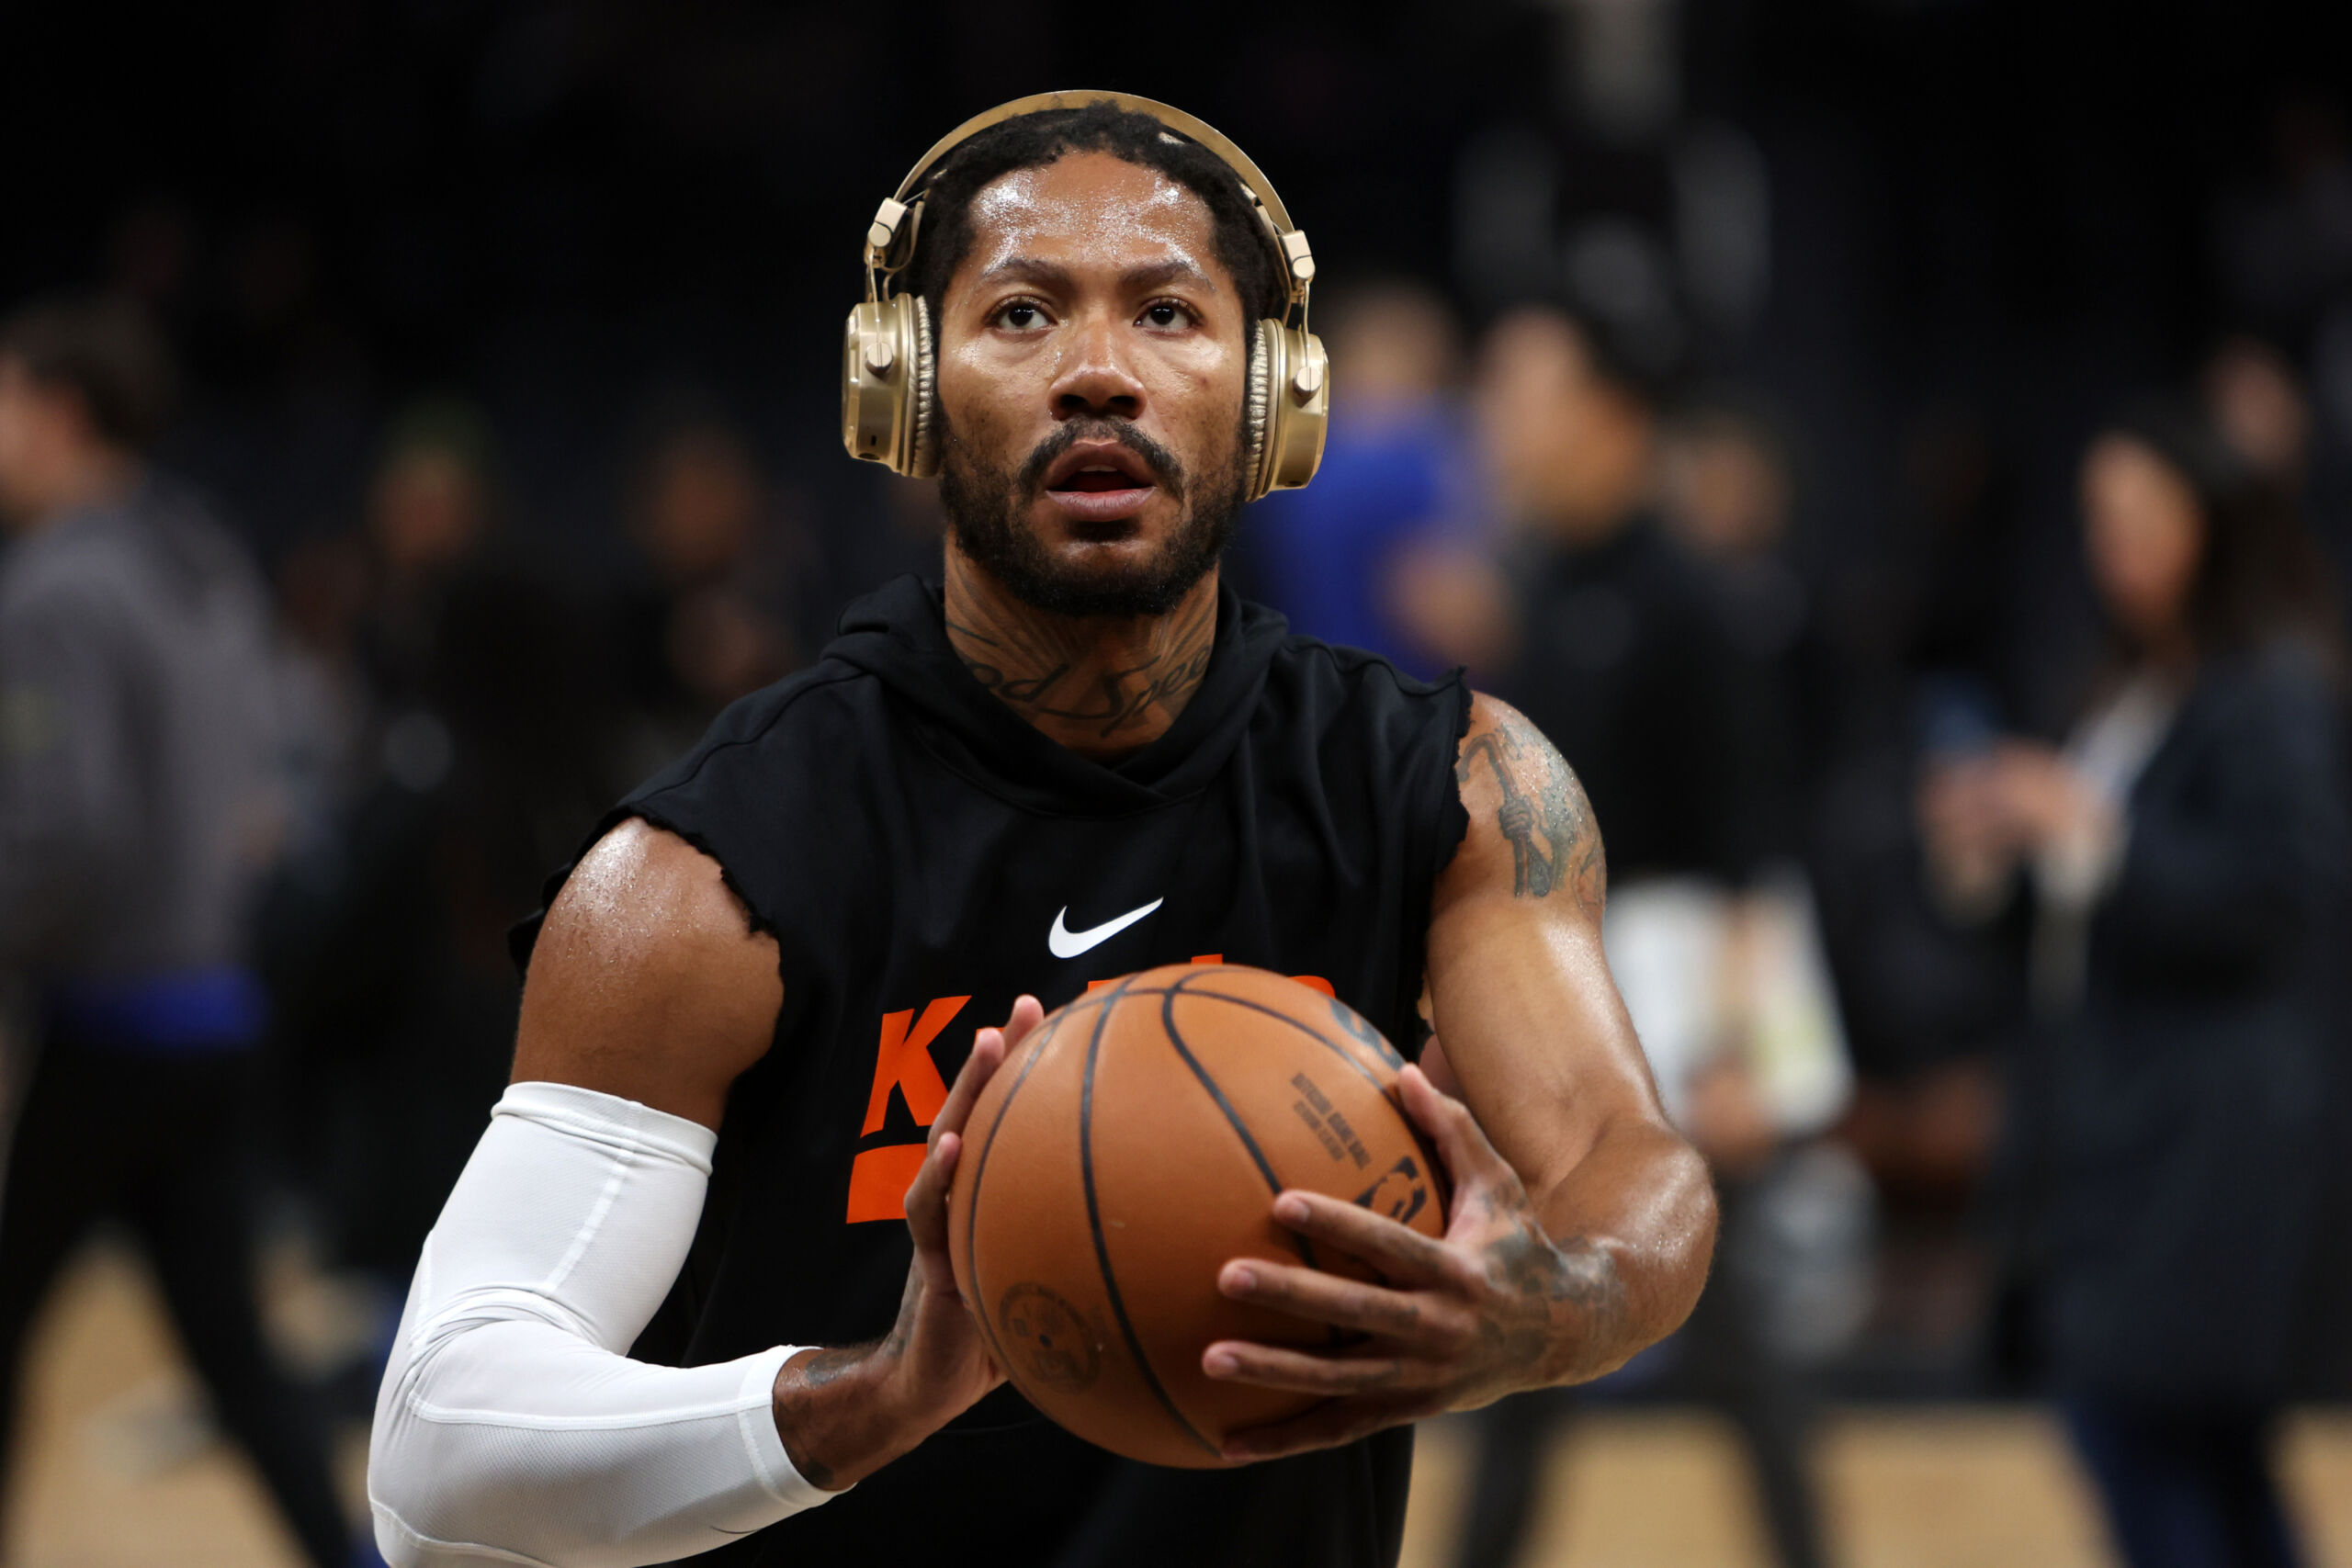 Grizzlies PG Derrick Rose's stunning claim about Knicks training